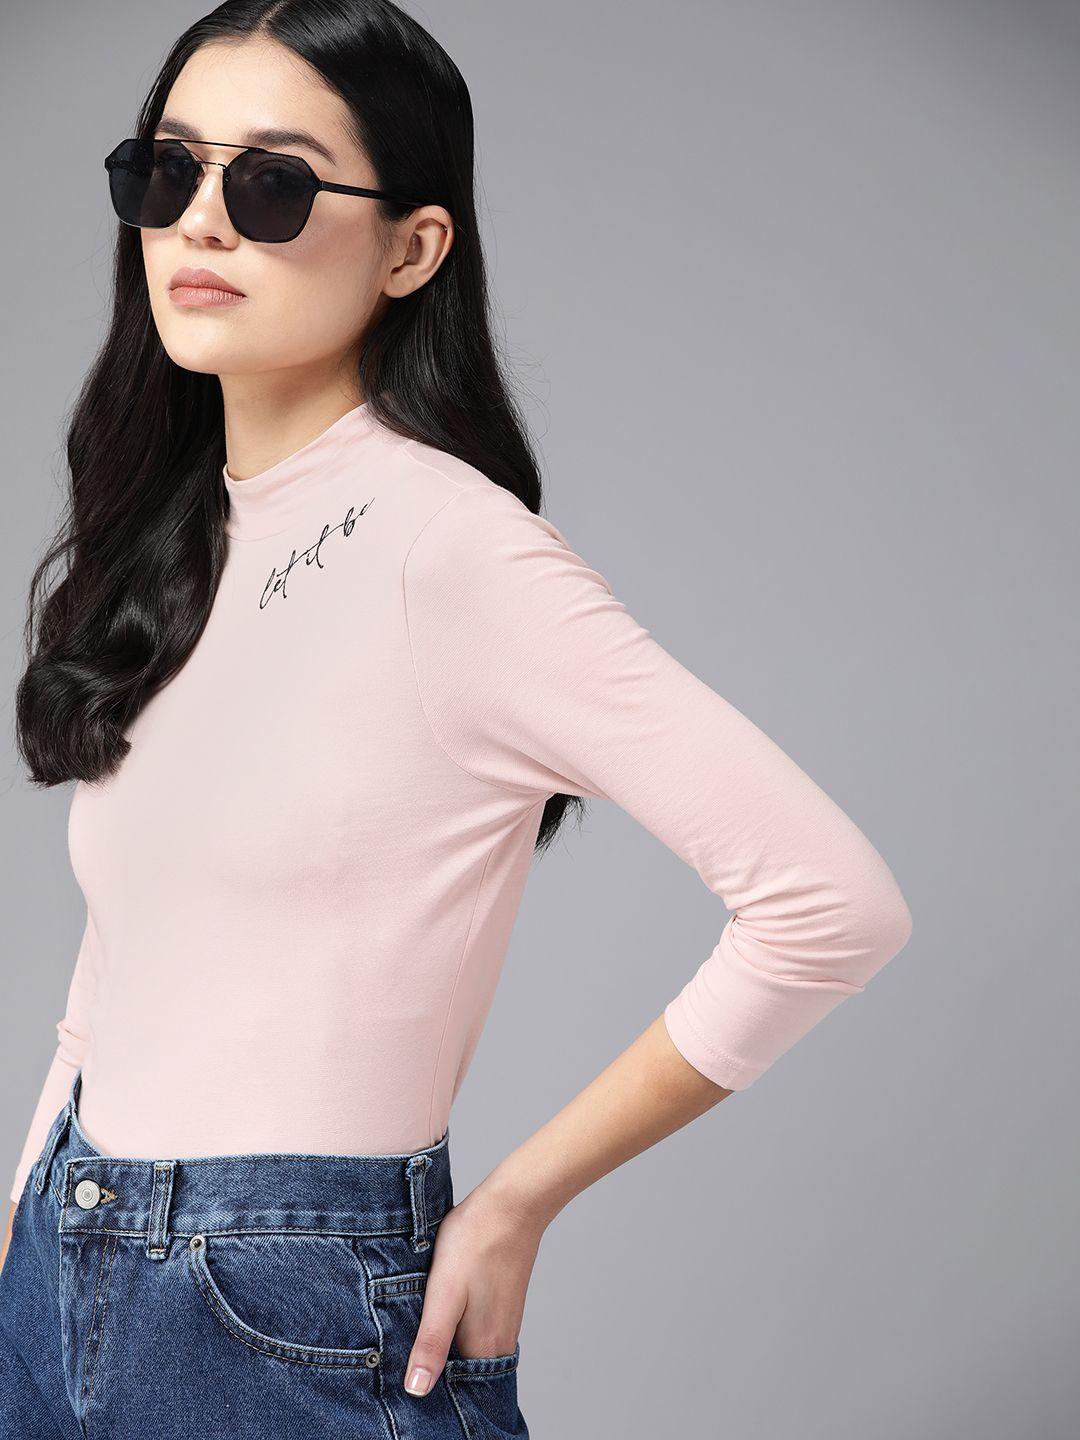 the roadster lifestyle co. applique detail high neck top